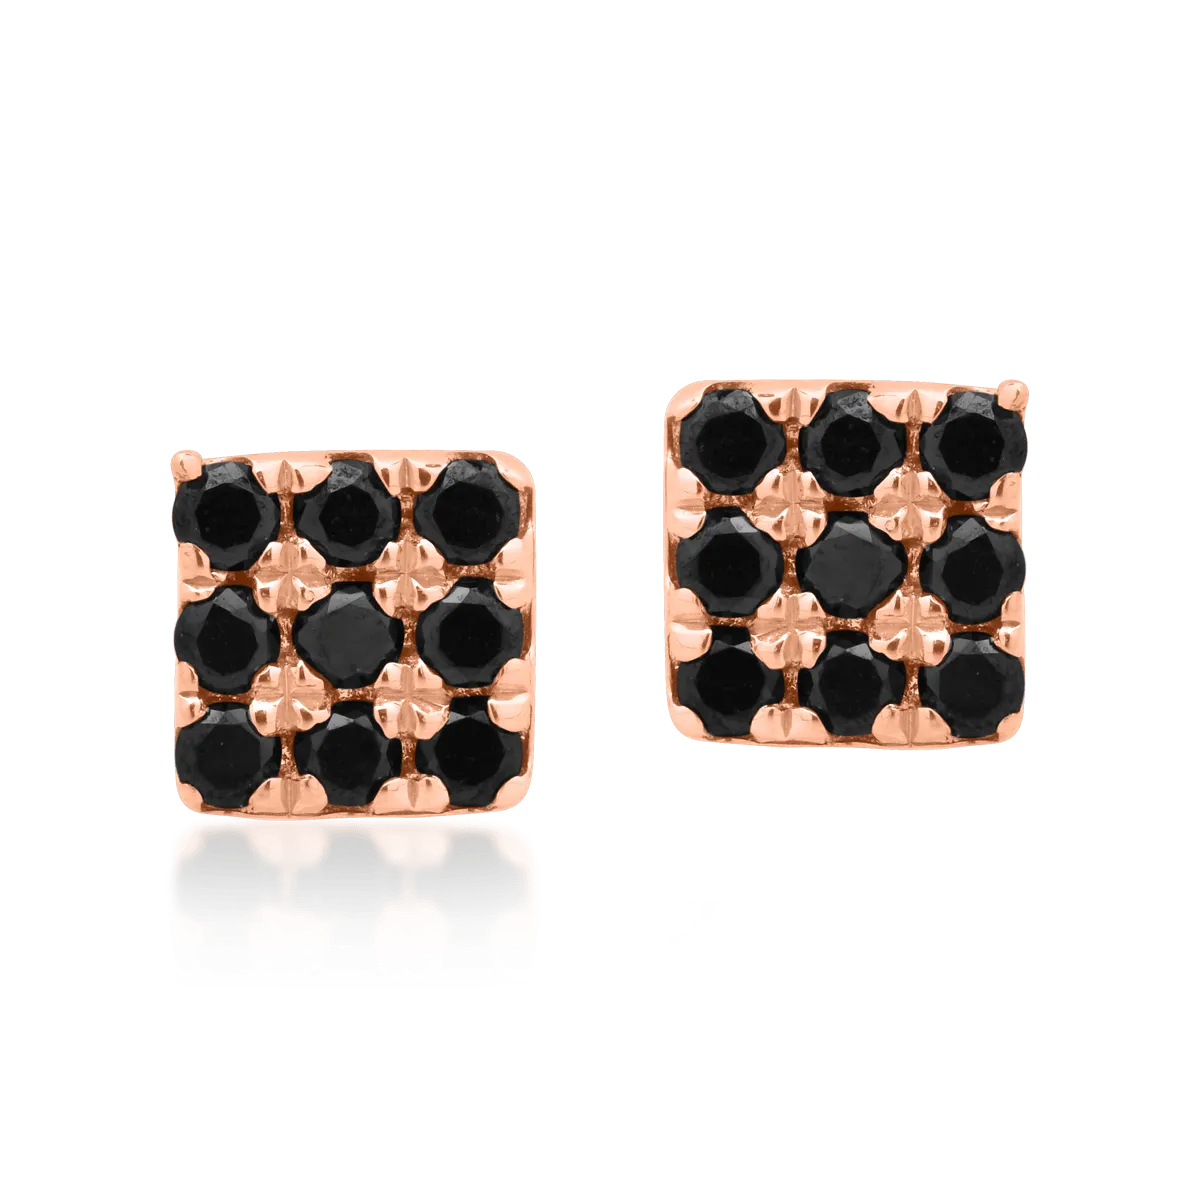 14K rose gold earrings with 0.146ct black diamonds